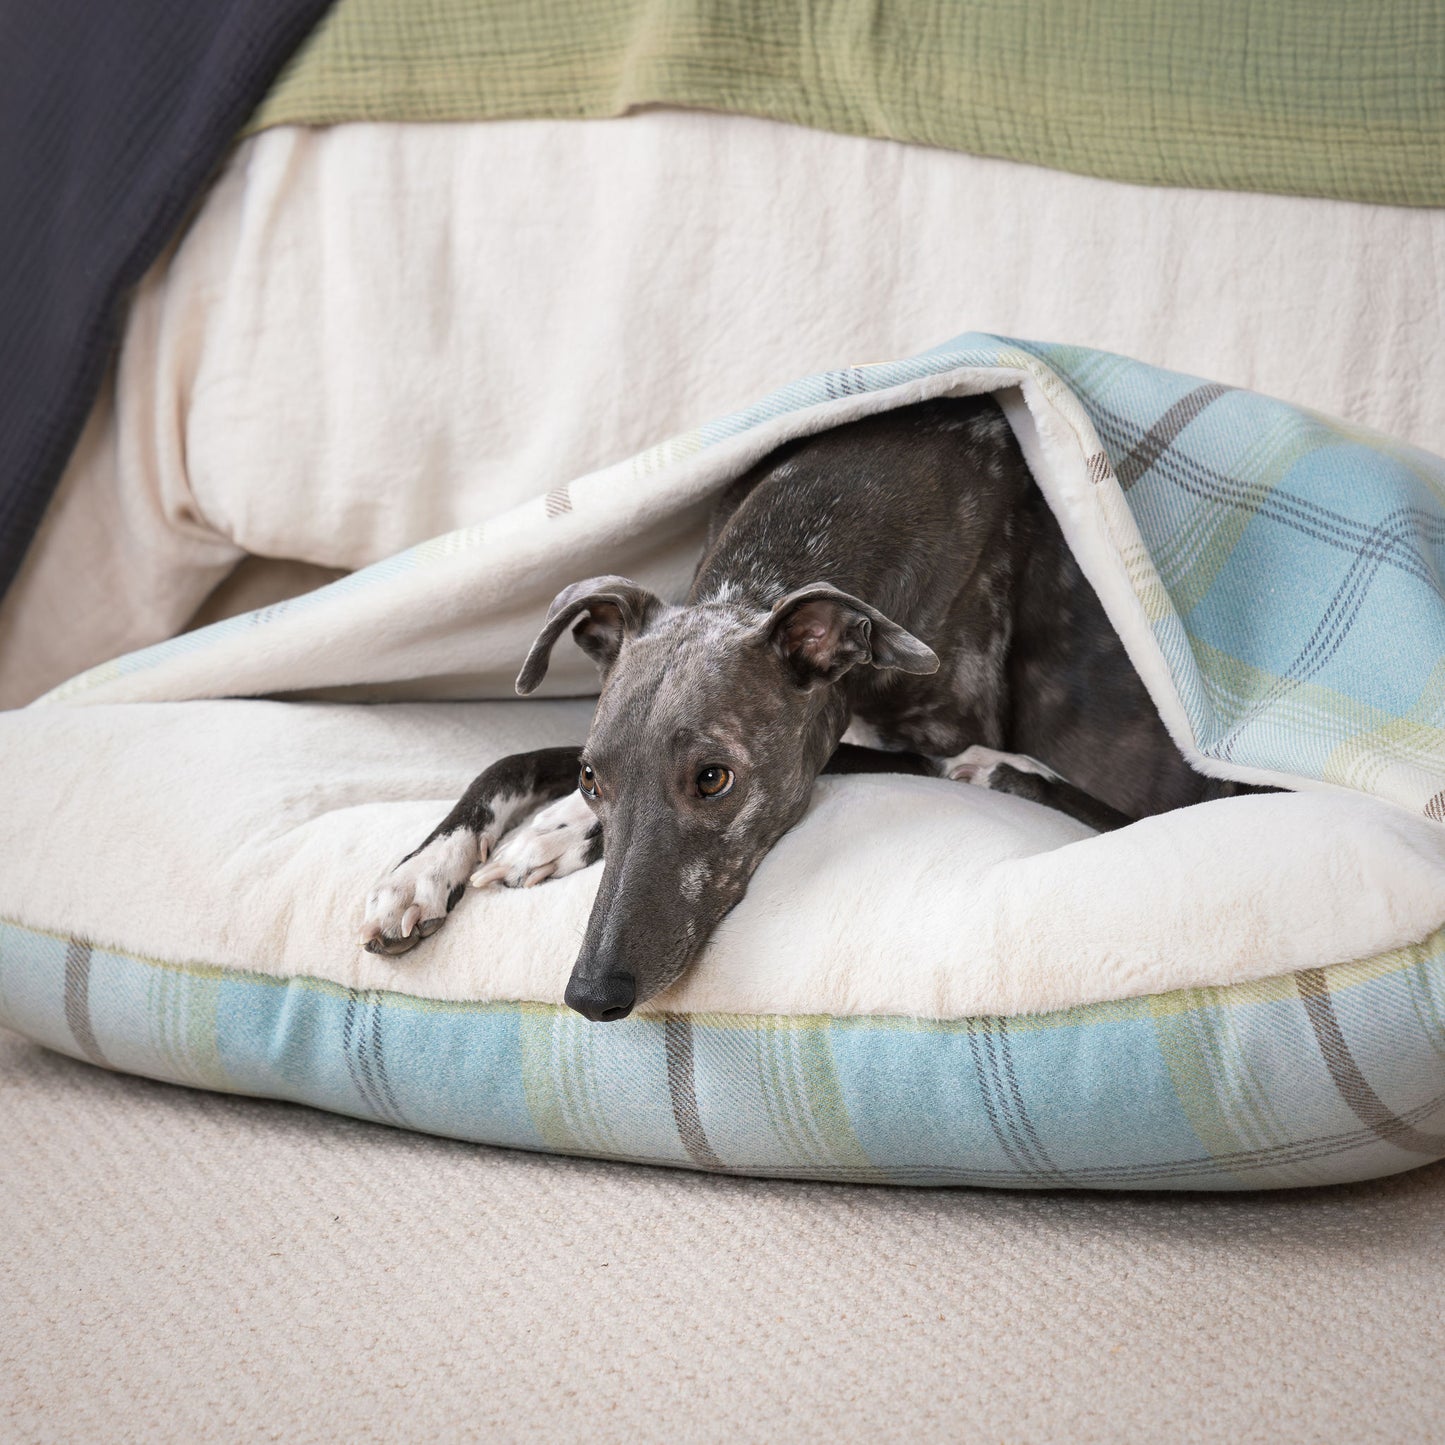 Discover The Perfect Burrow For Your Pet, Our Stunning Sleepy Burrow Dog Beds In Duck Egg Tweed Is The Perfect Bed Choice For Your Pet, Available Now at Lords & Labradors